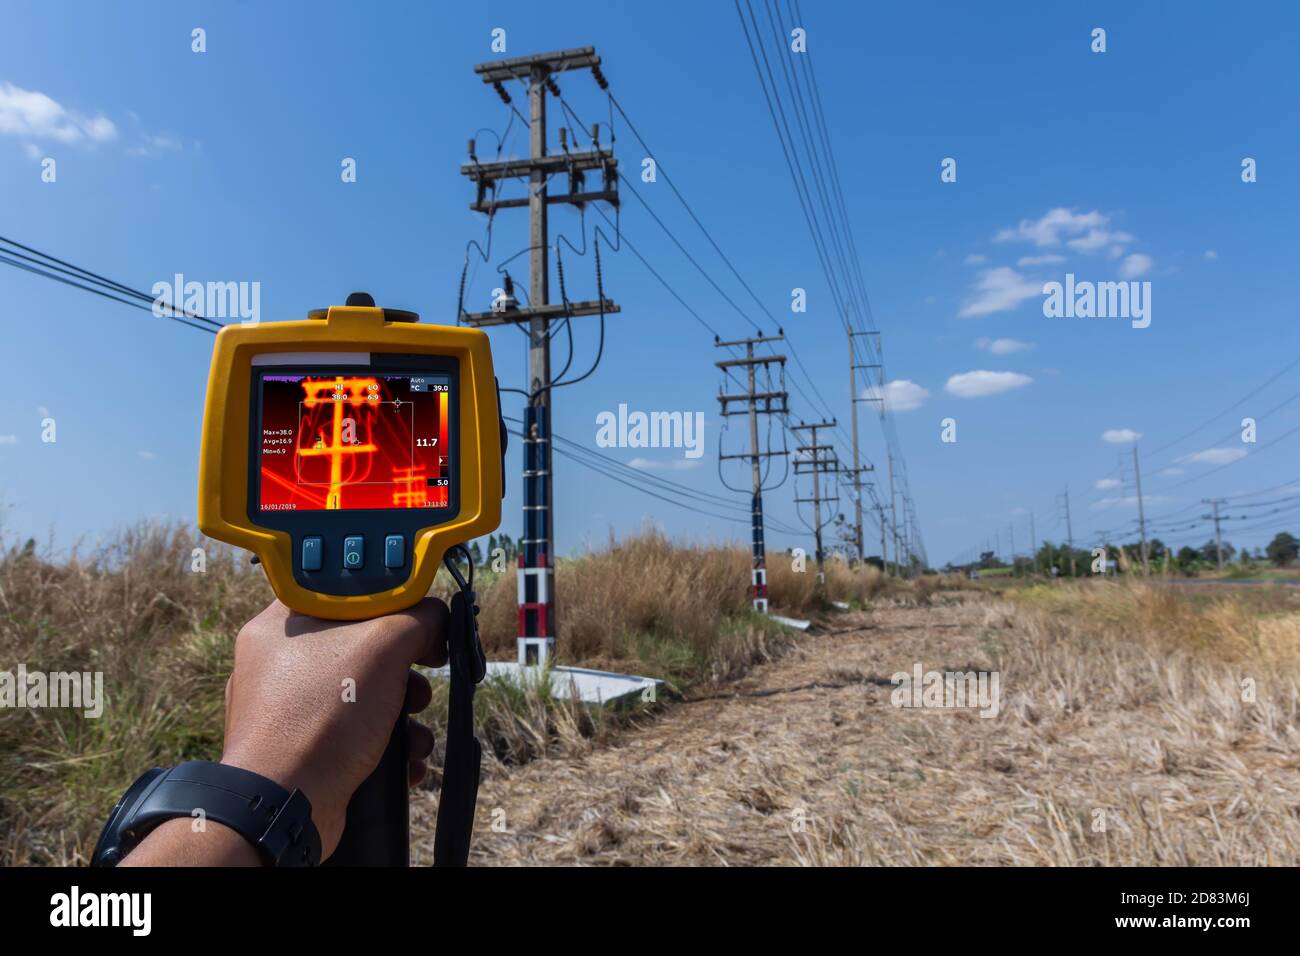 Thermoscan(thermal image camera), Industrial equipment used for checking the internal temperature of the machine for preventive maintenance, This is c Stock Photo